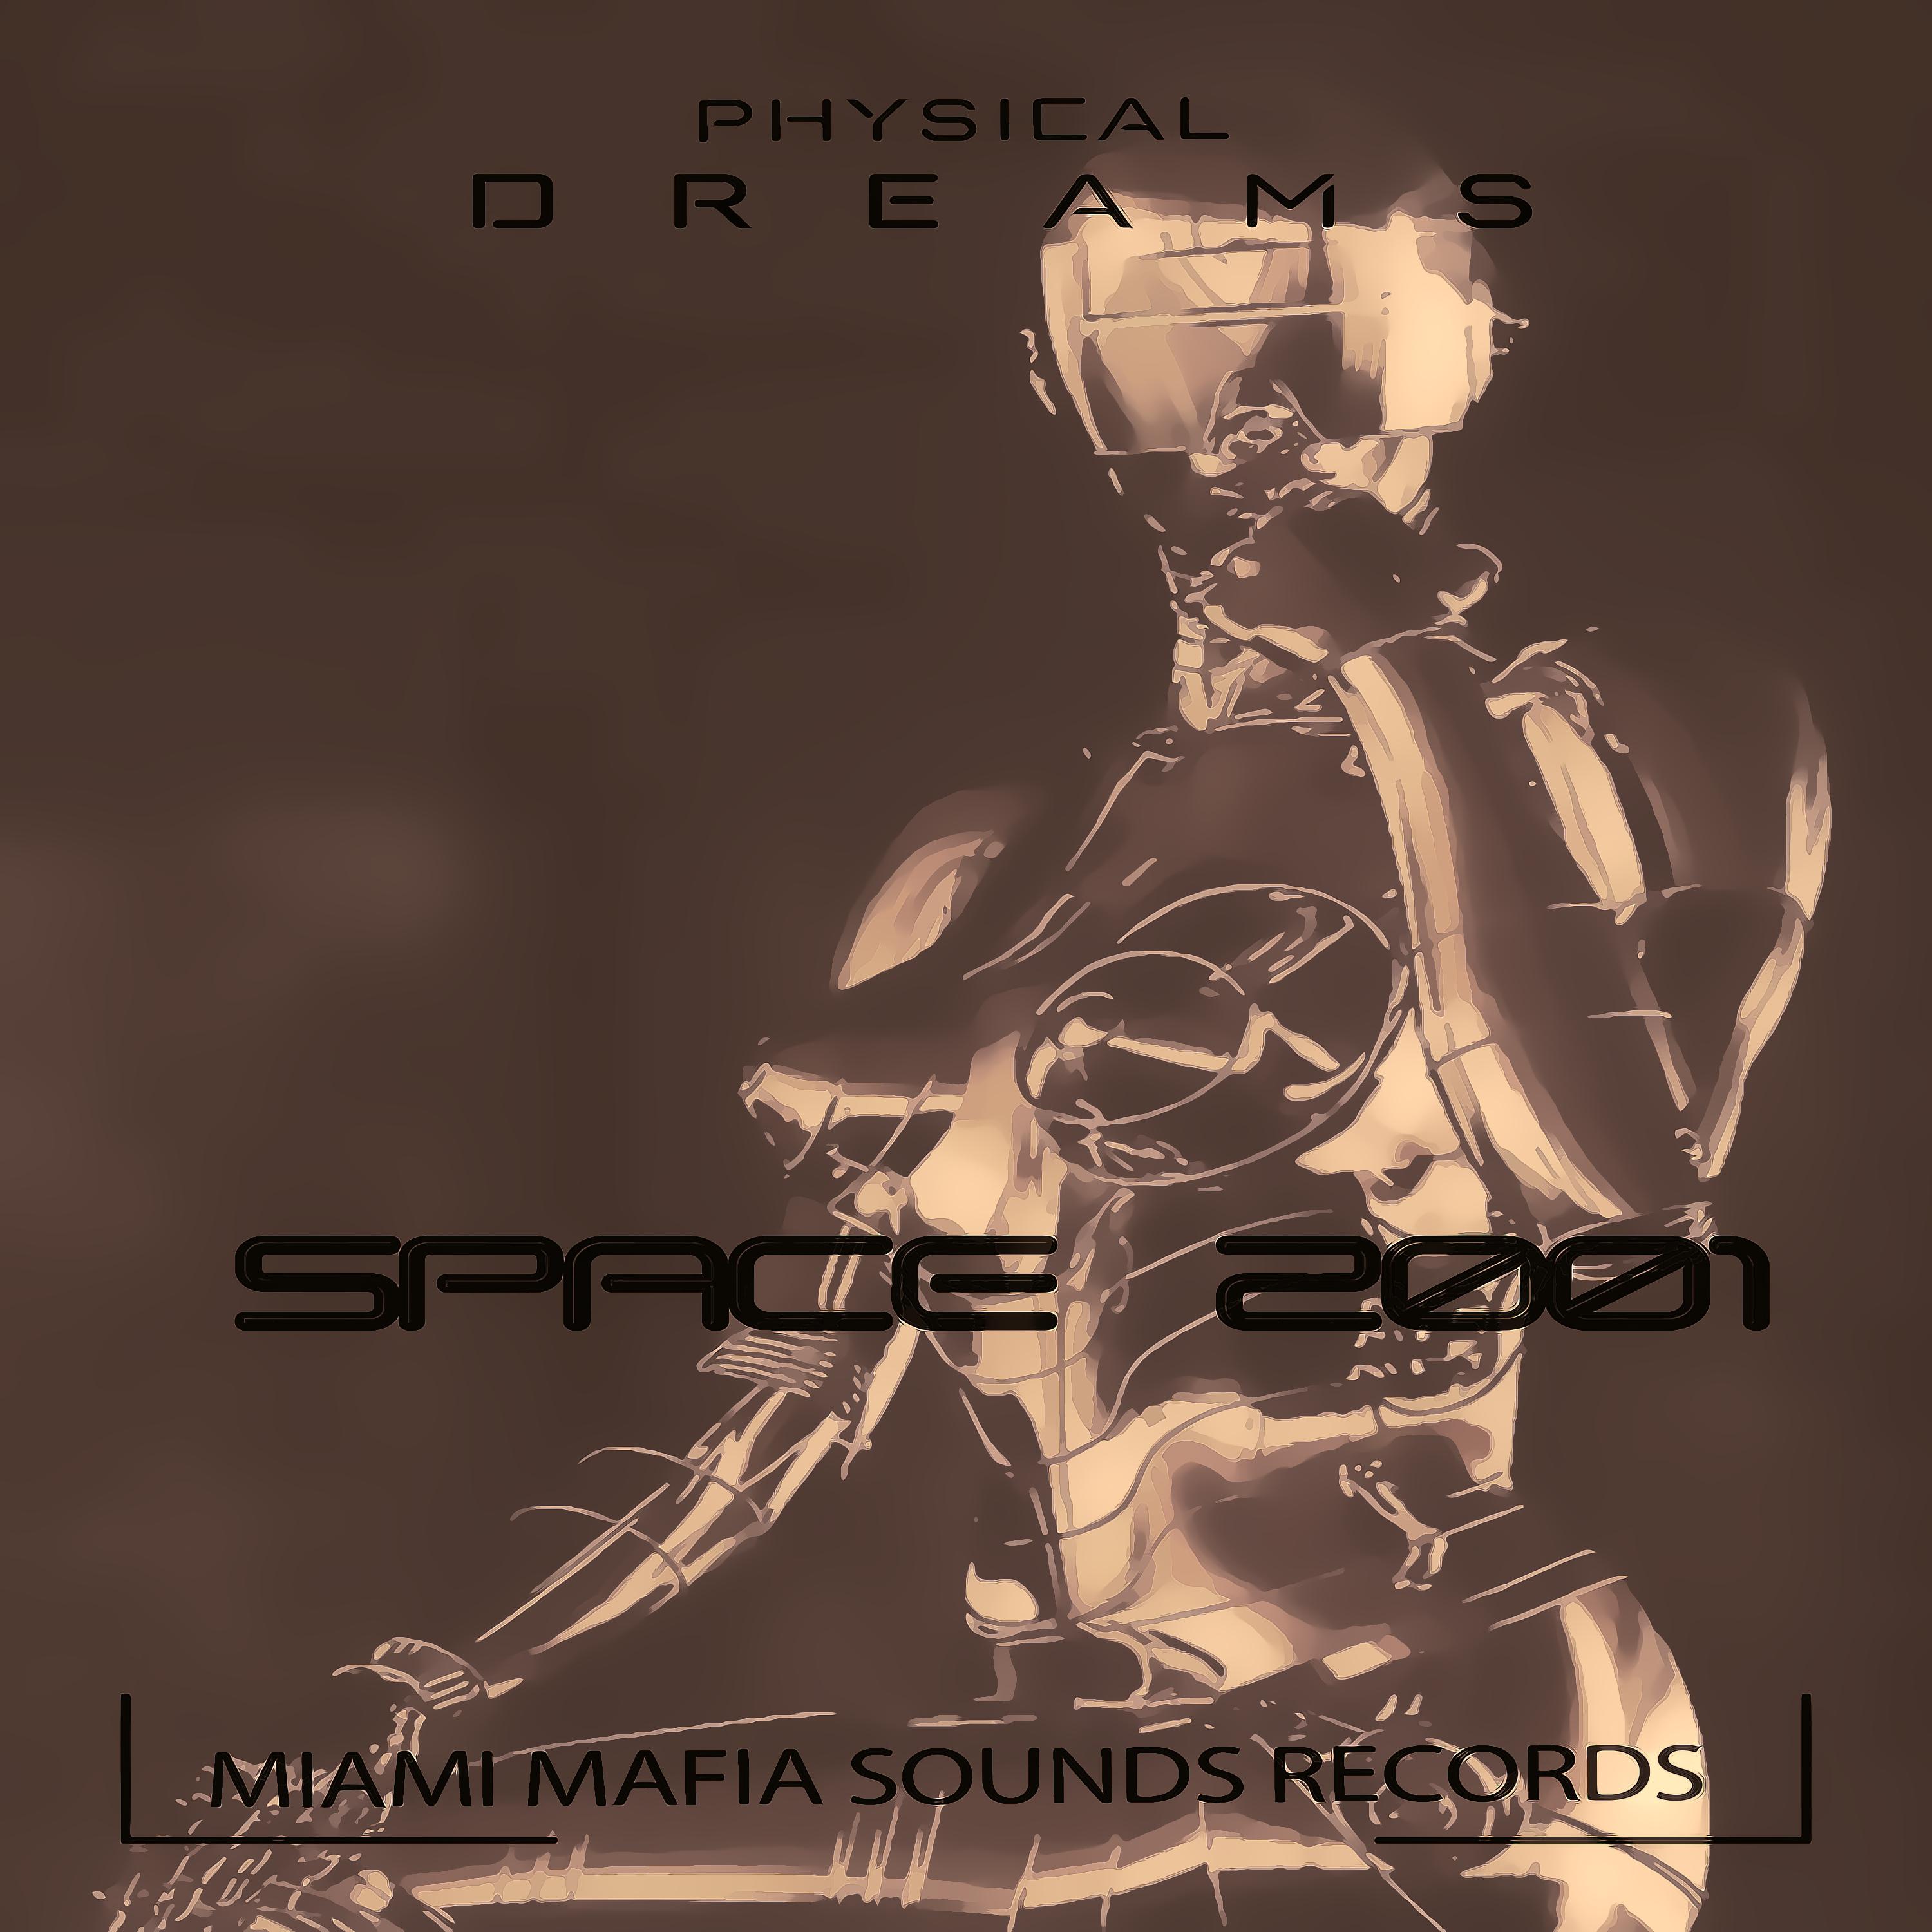 Space 2001